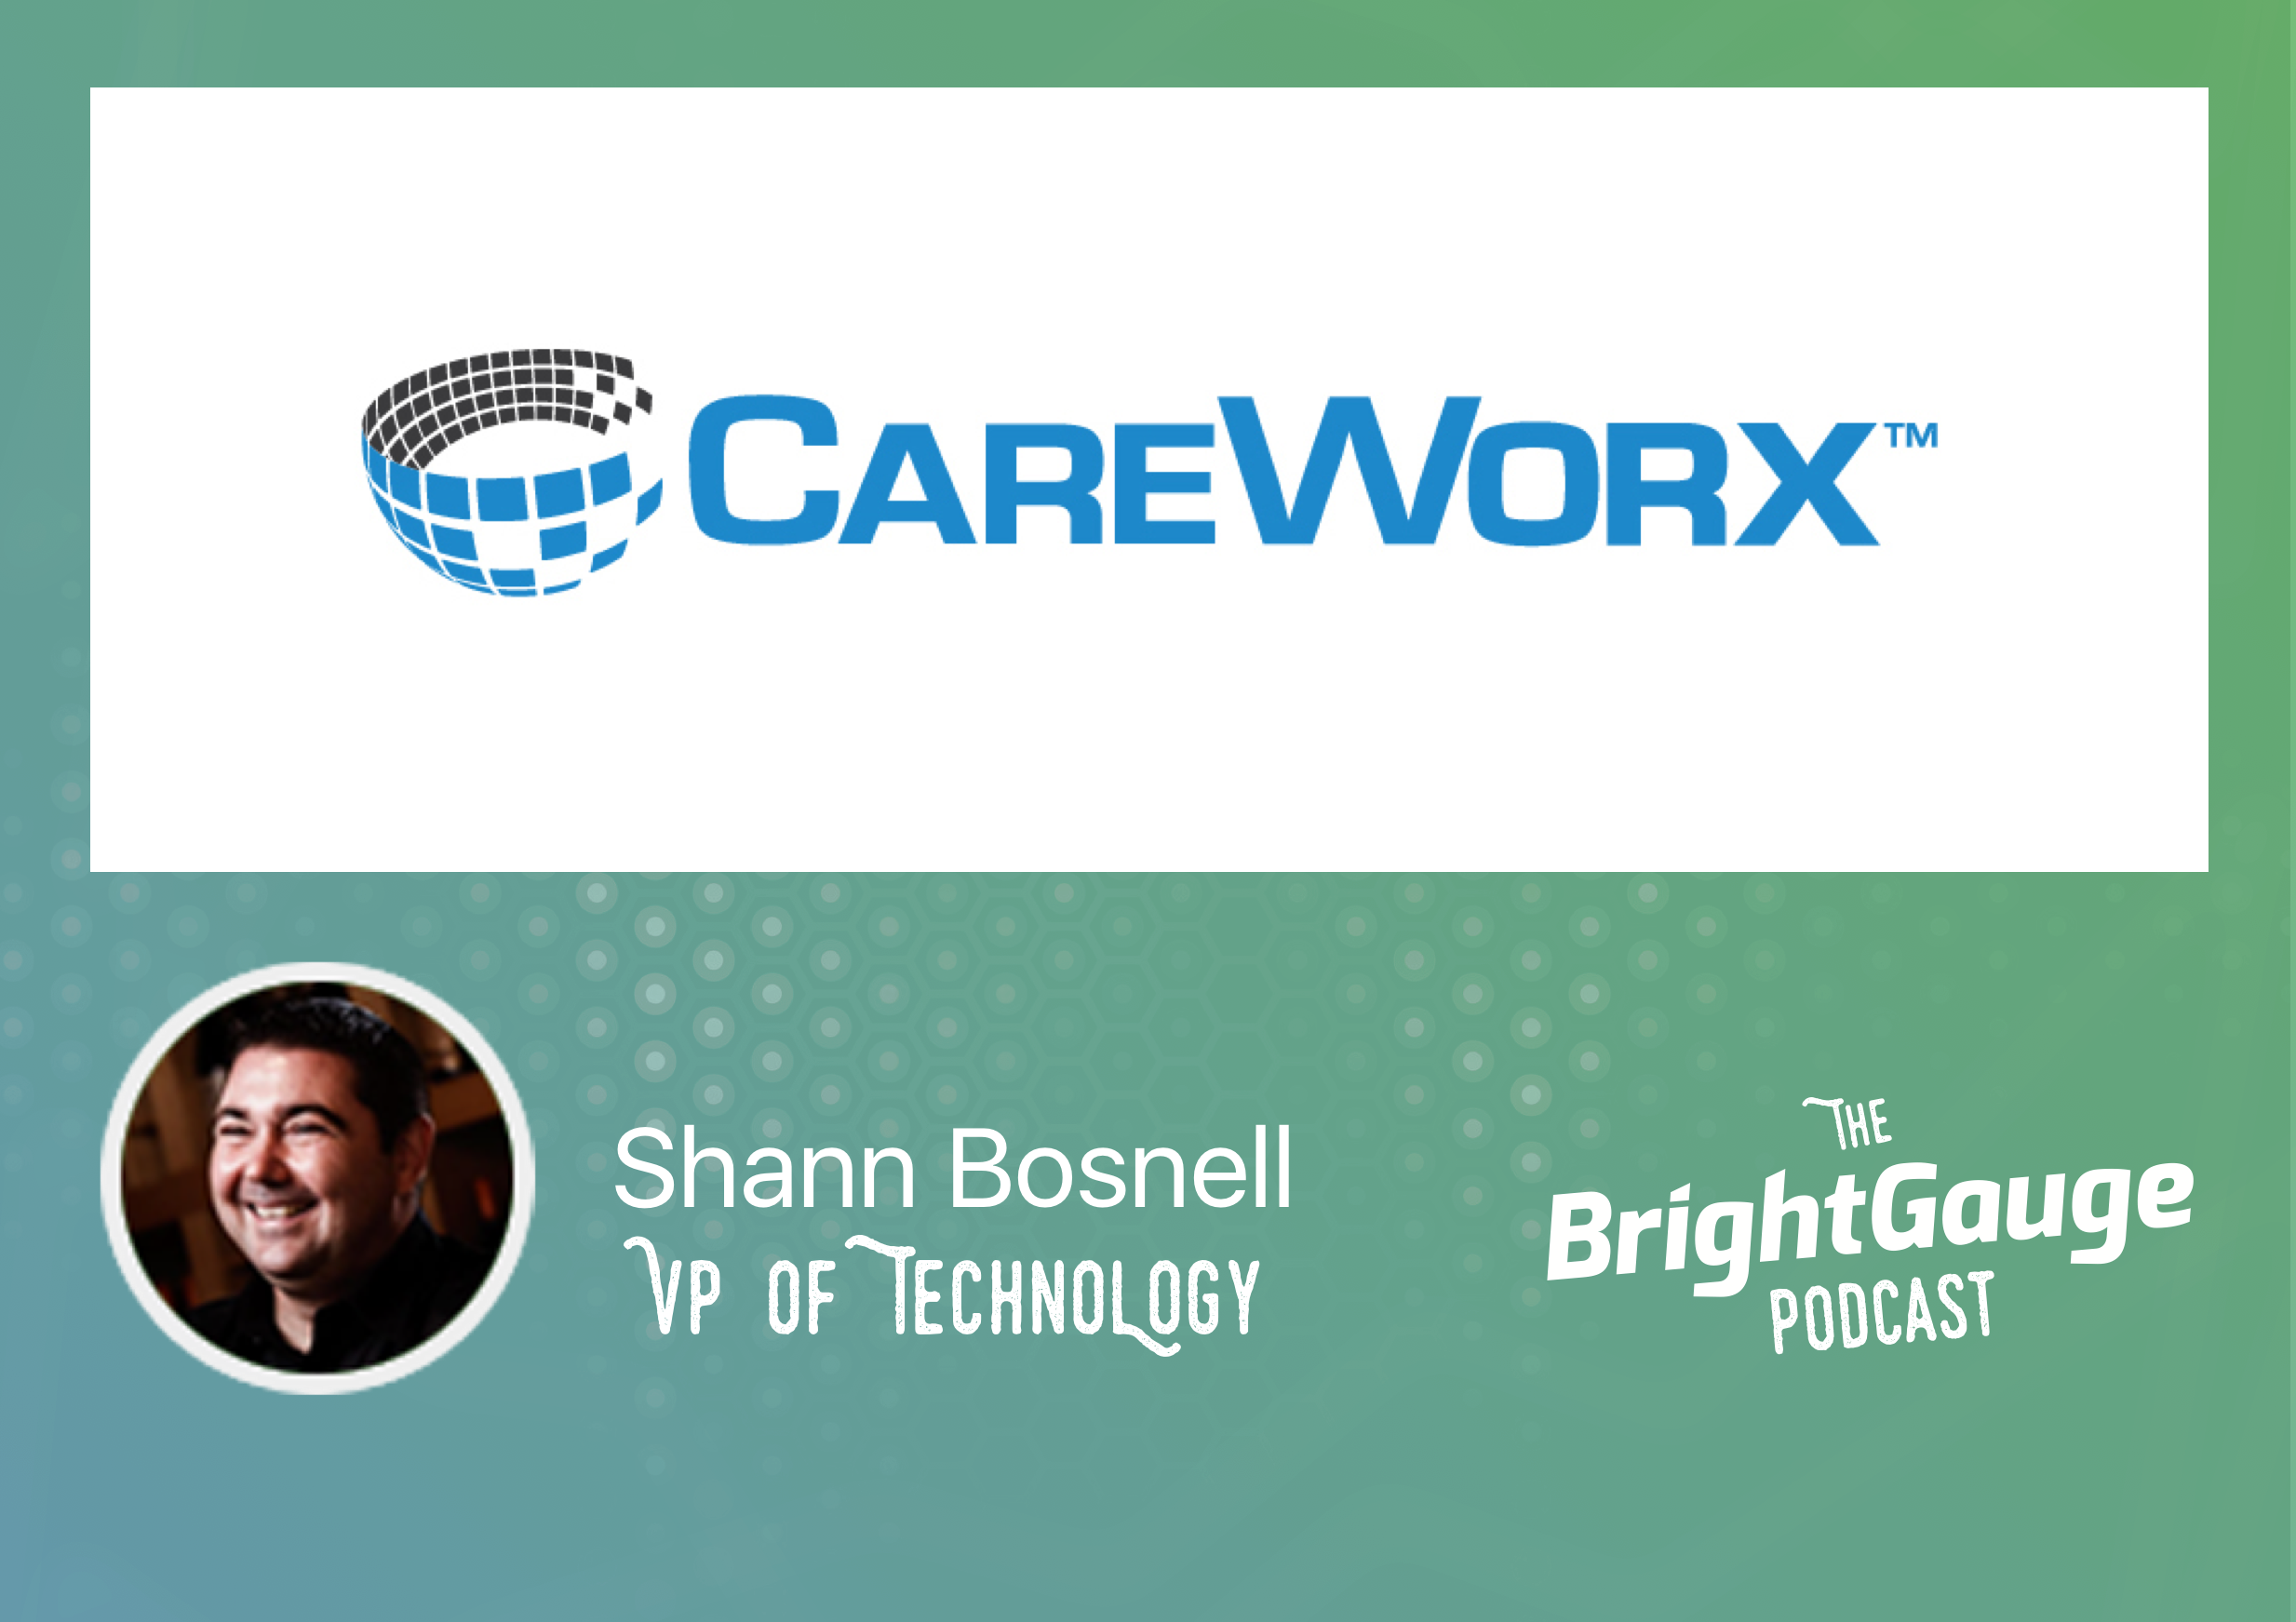 [Podcast] Episode 19 with Shann Bosnell of CareWorx